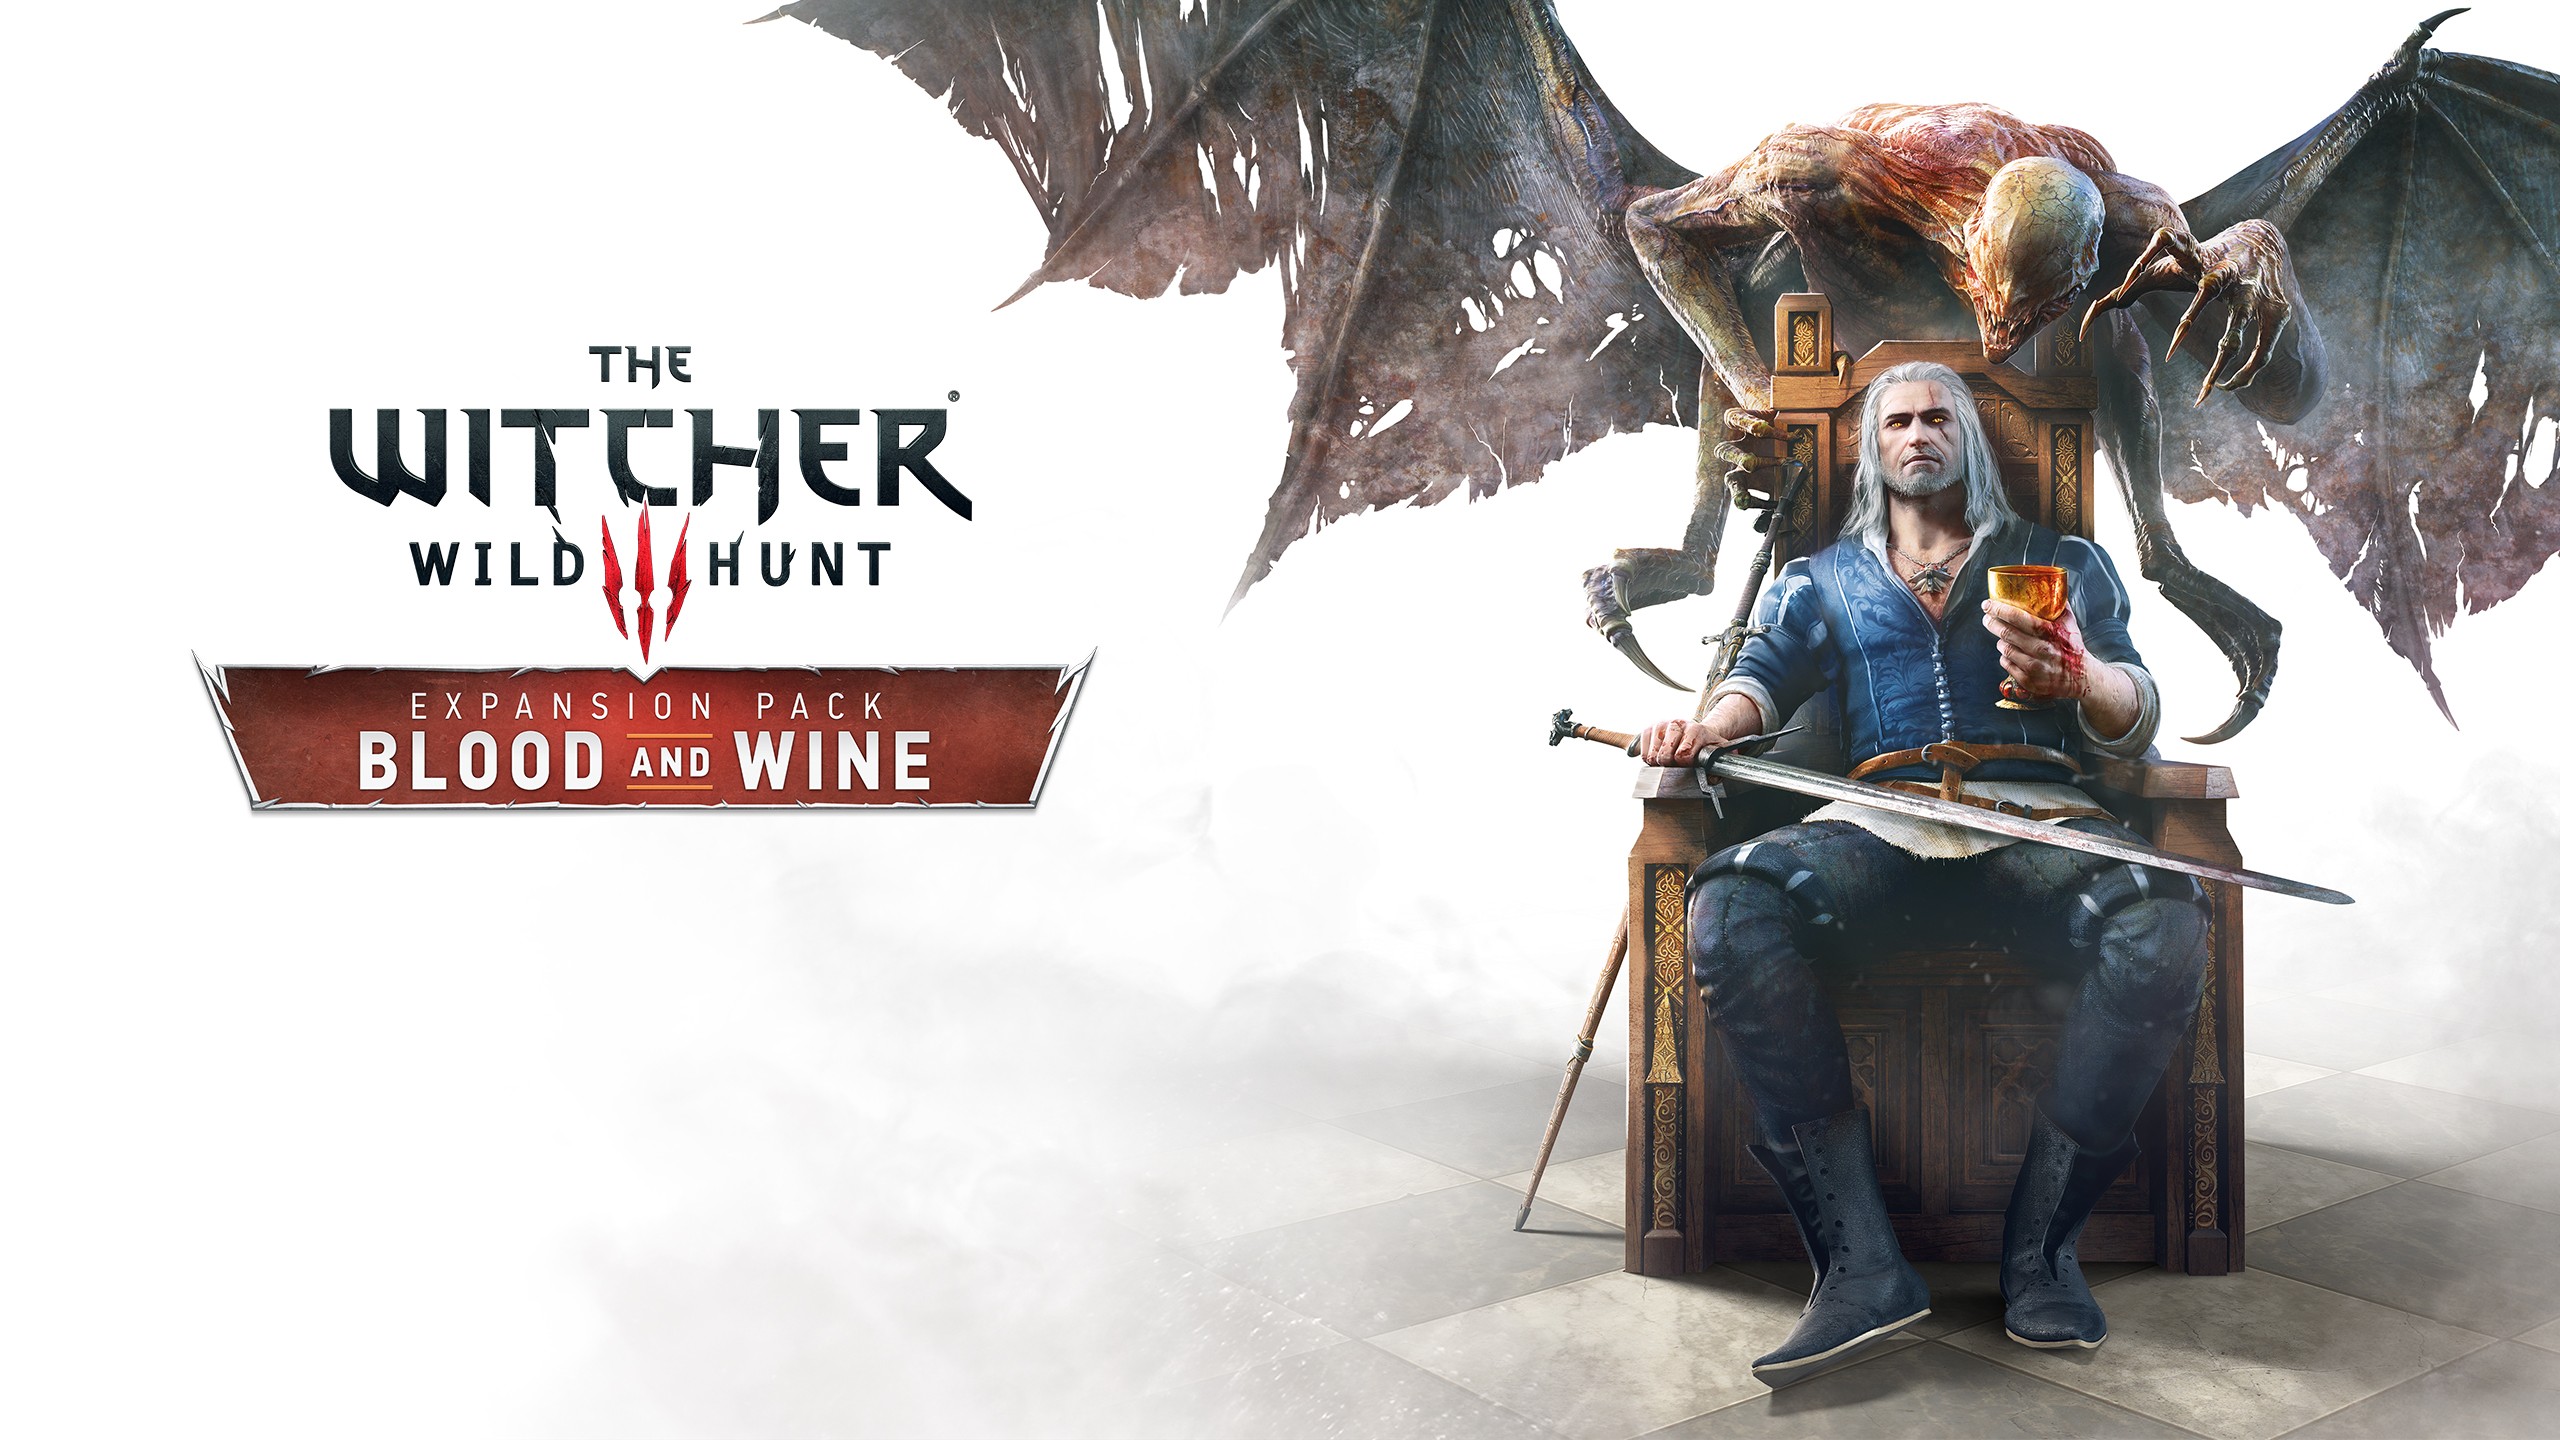 The Witcher 3 Wild Hunt Geralt Of Rivia CD Projekt RED The Witcher 3 Wild Hunt Blood And Wine DLC 2560x1440